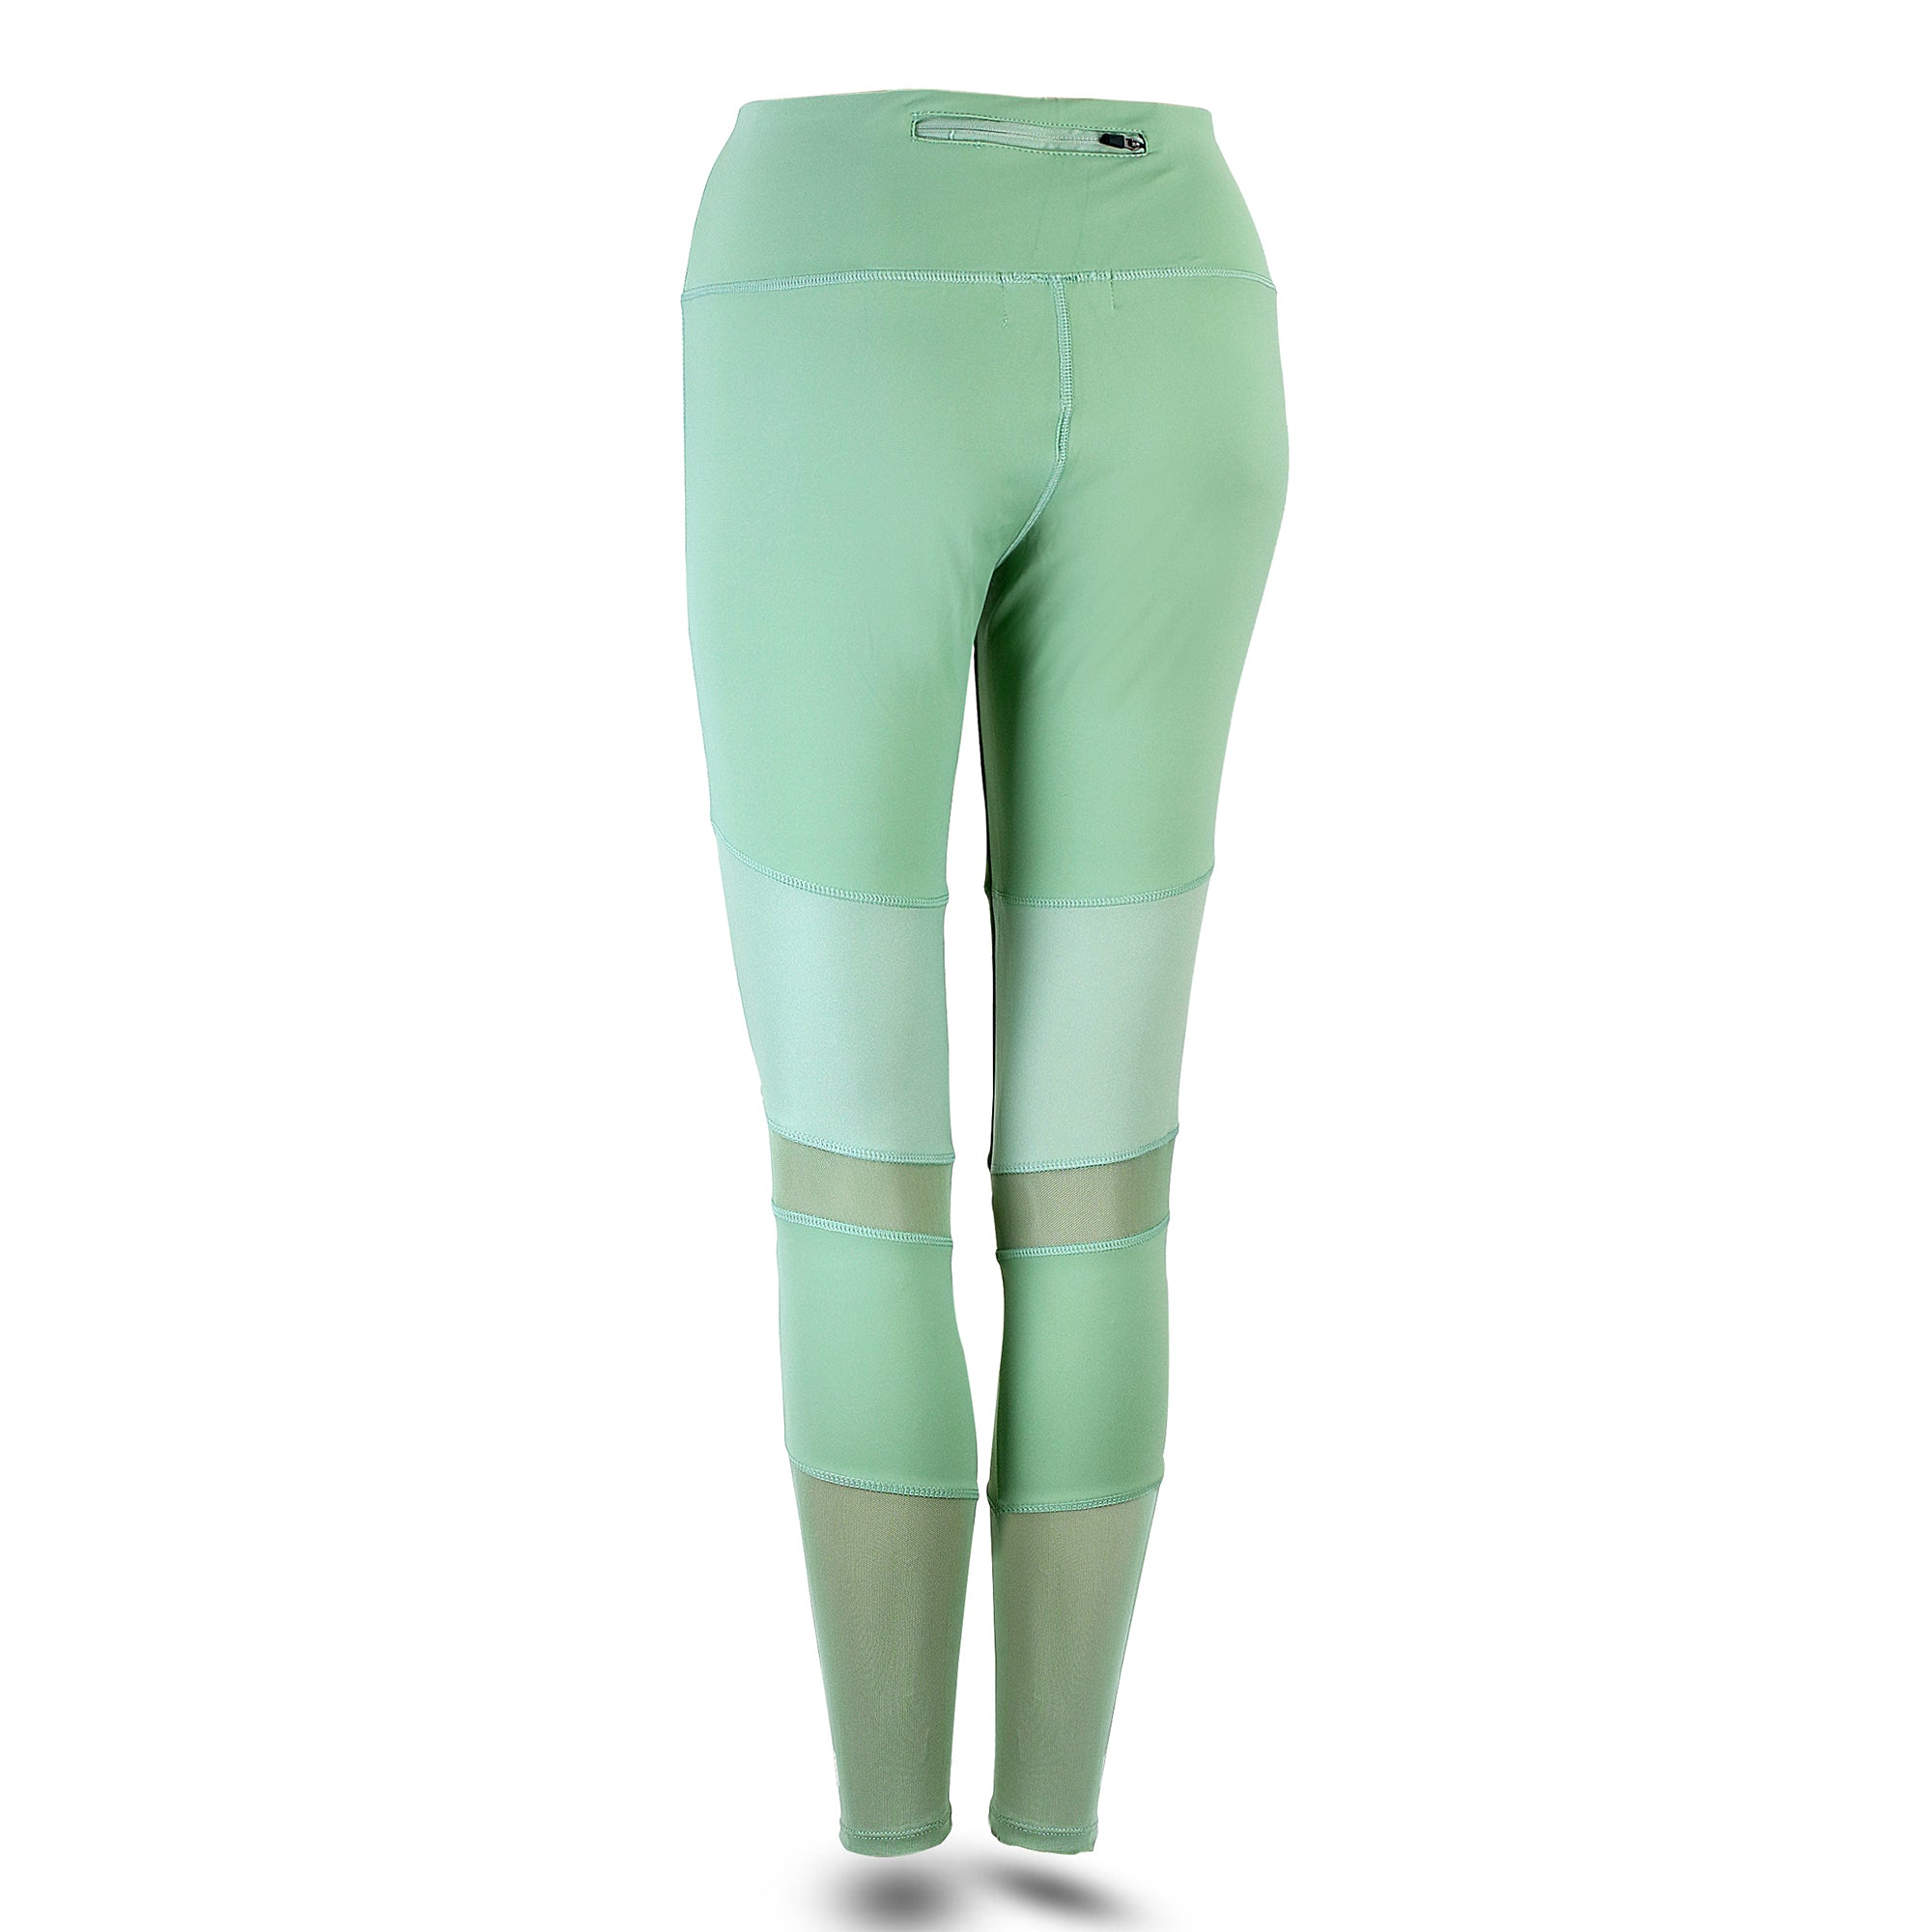 ***ELITE COLLECTION*** On-Trend Sage Leggings with "Leather-Look" and Mesh Inserts